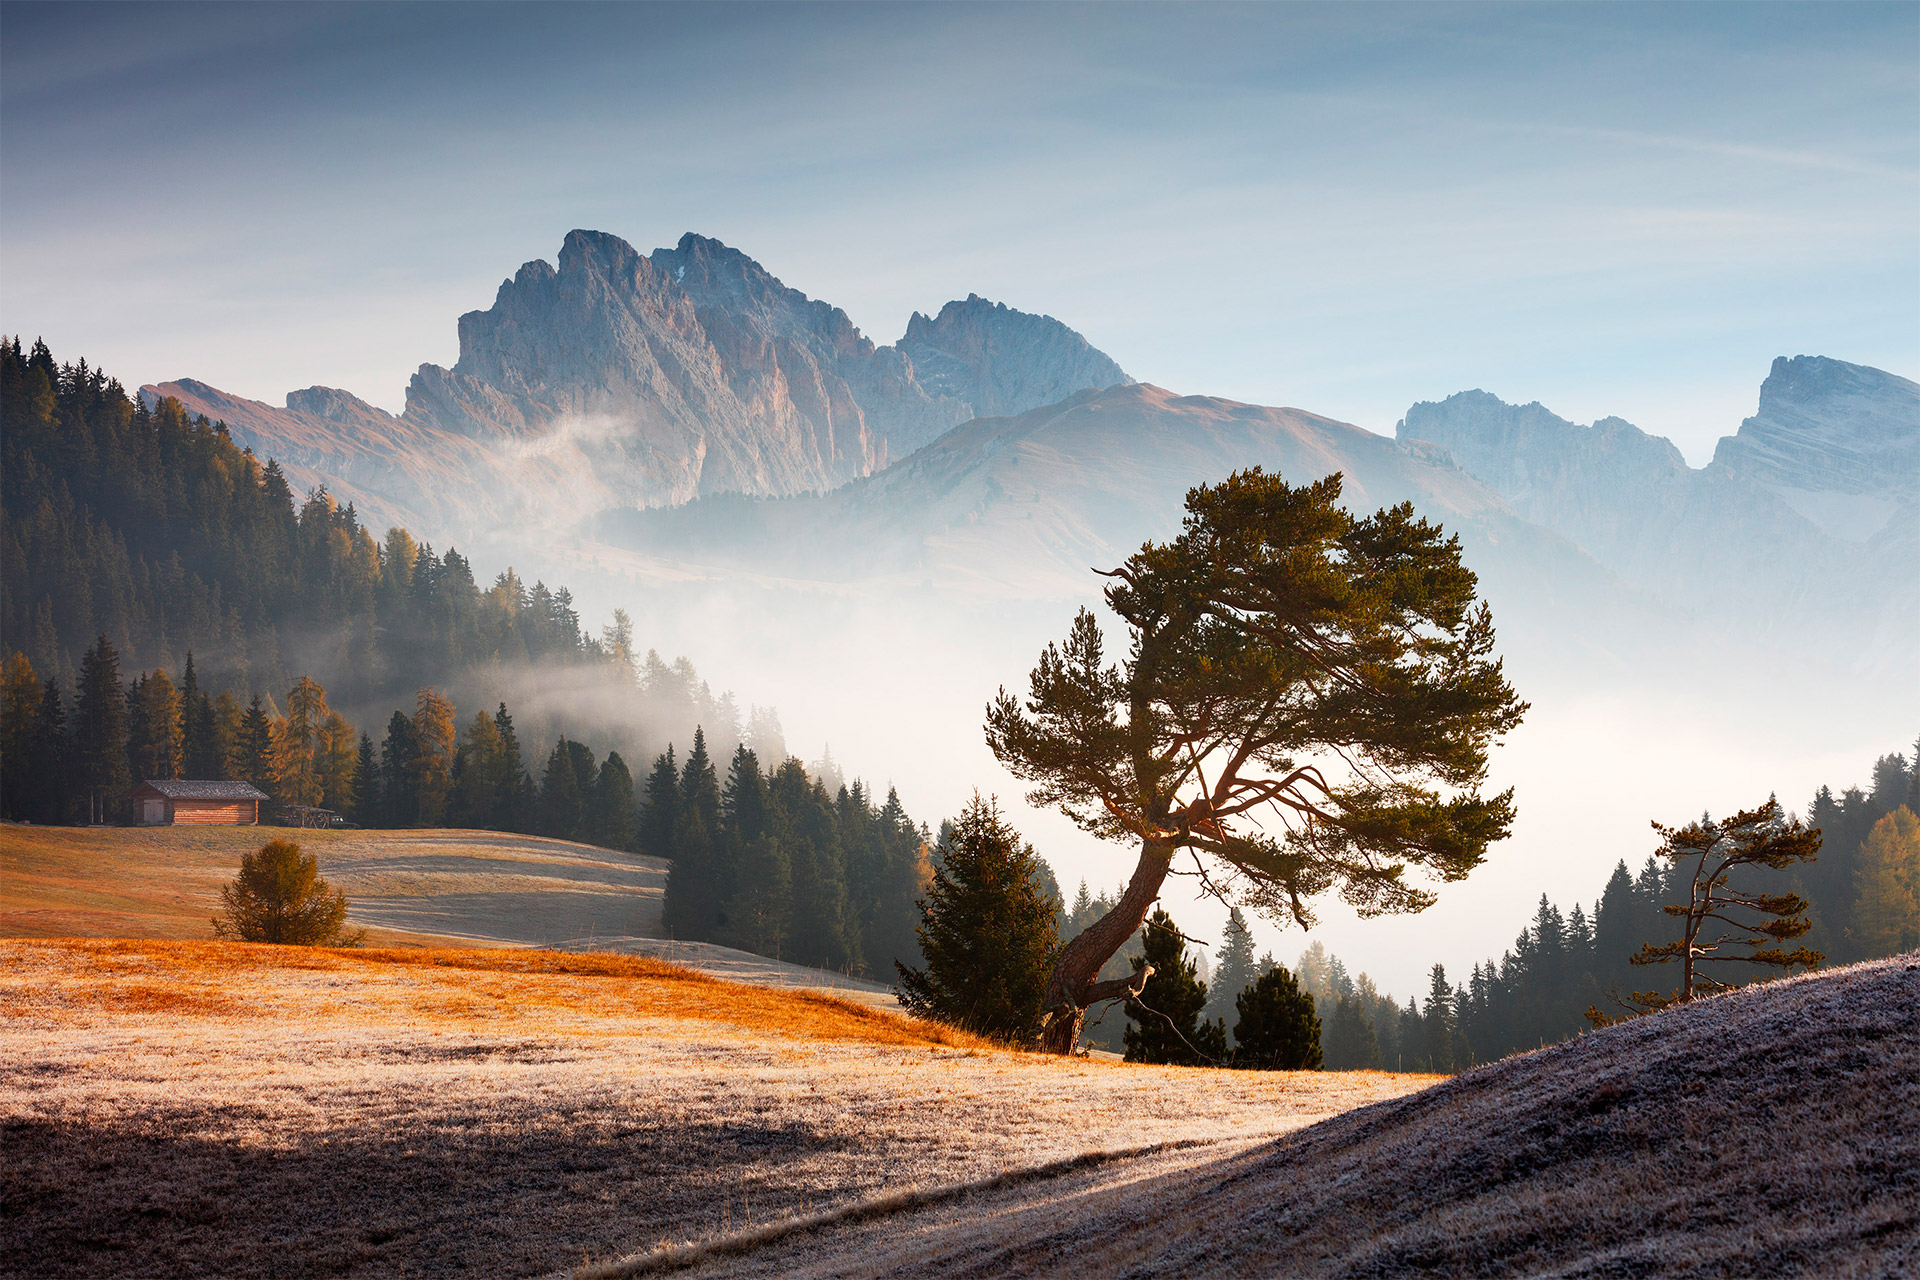 General 1920x1280 nature landscape trees Martin Rak Dolomites Italy morning mist clouds mountains valley forest